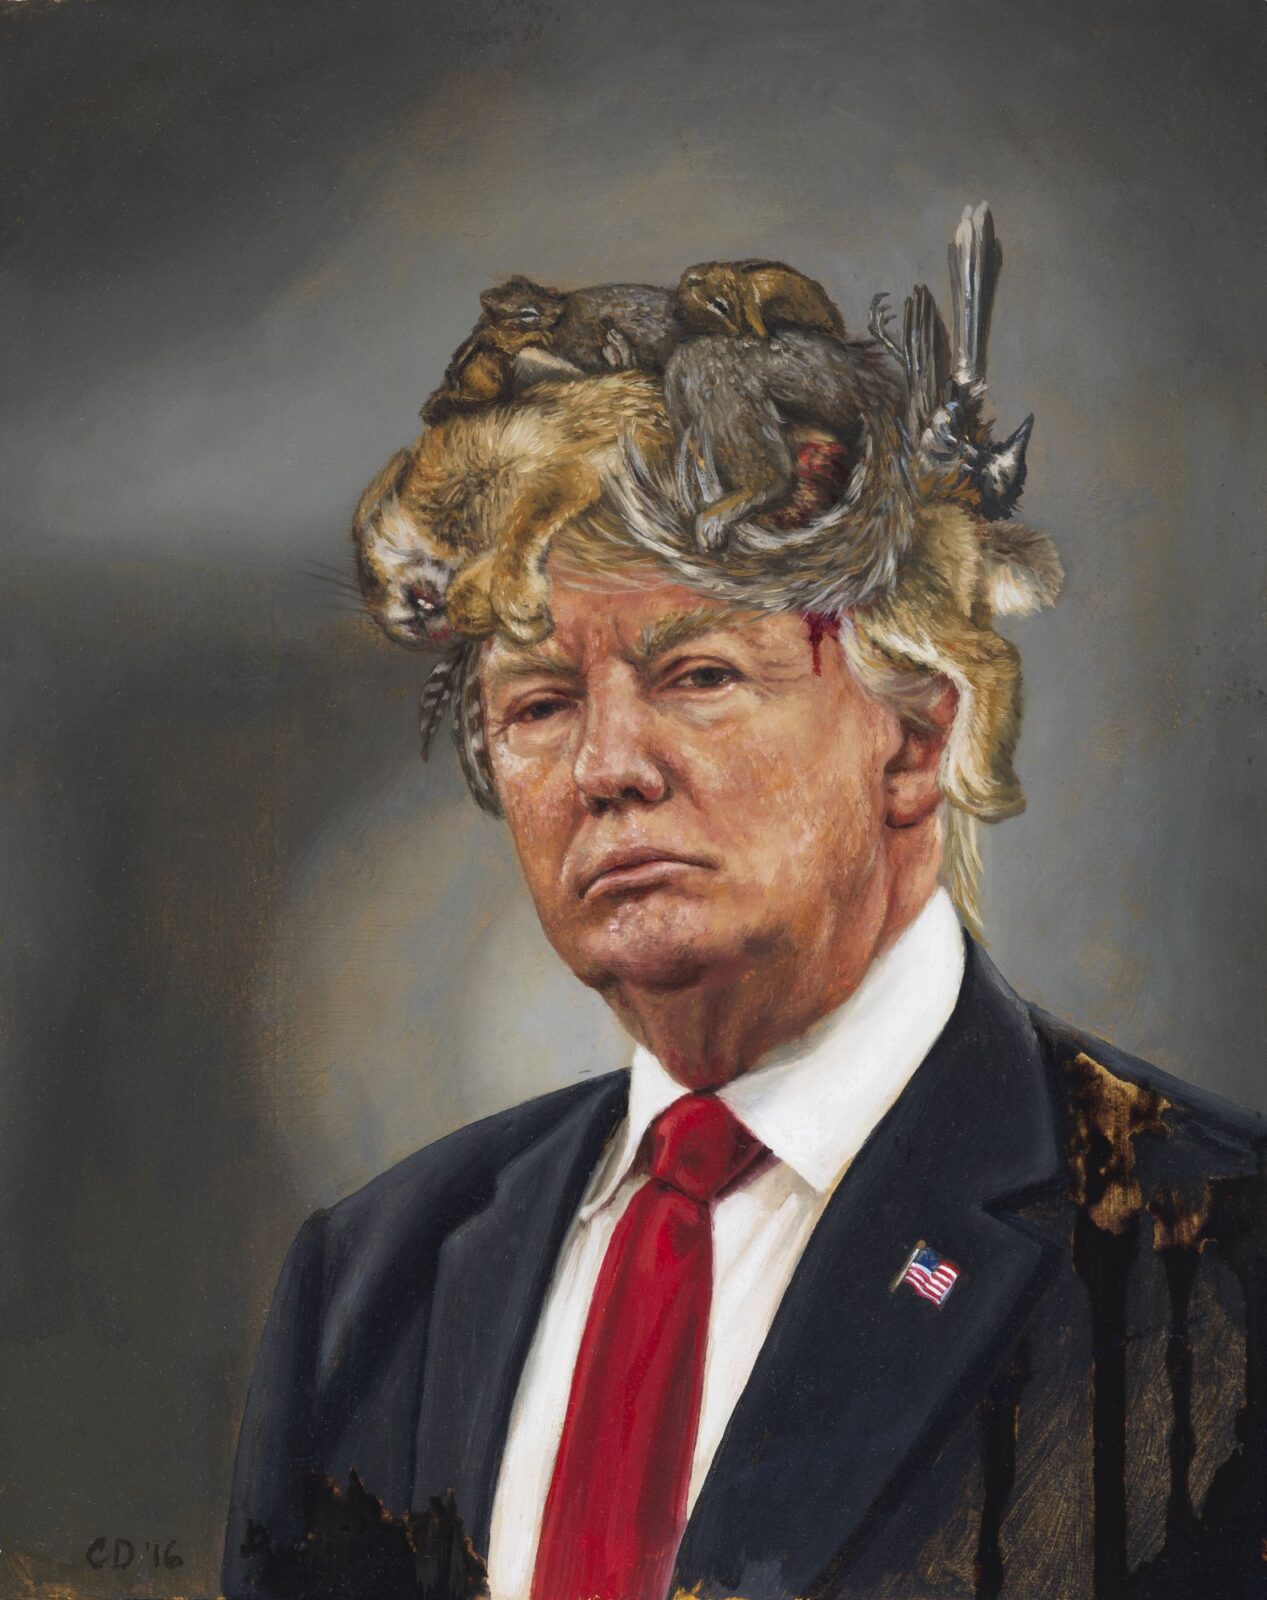 "Donald Trump with a Crown of Roadkill" by Cara Deangelis